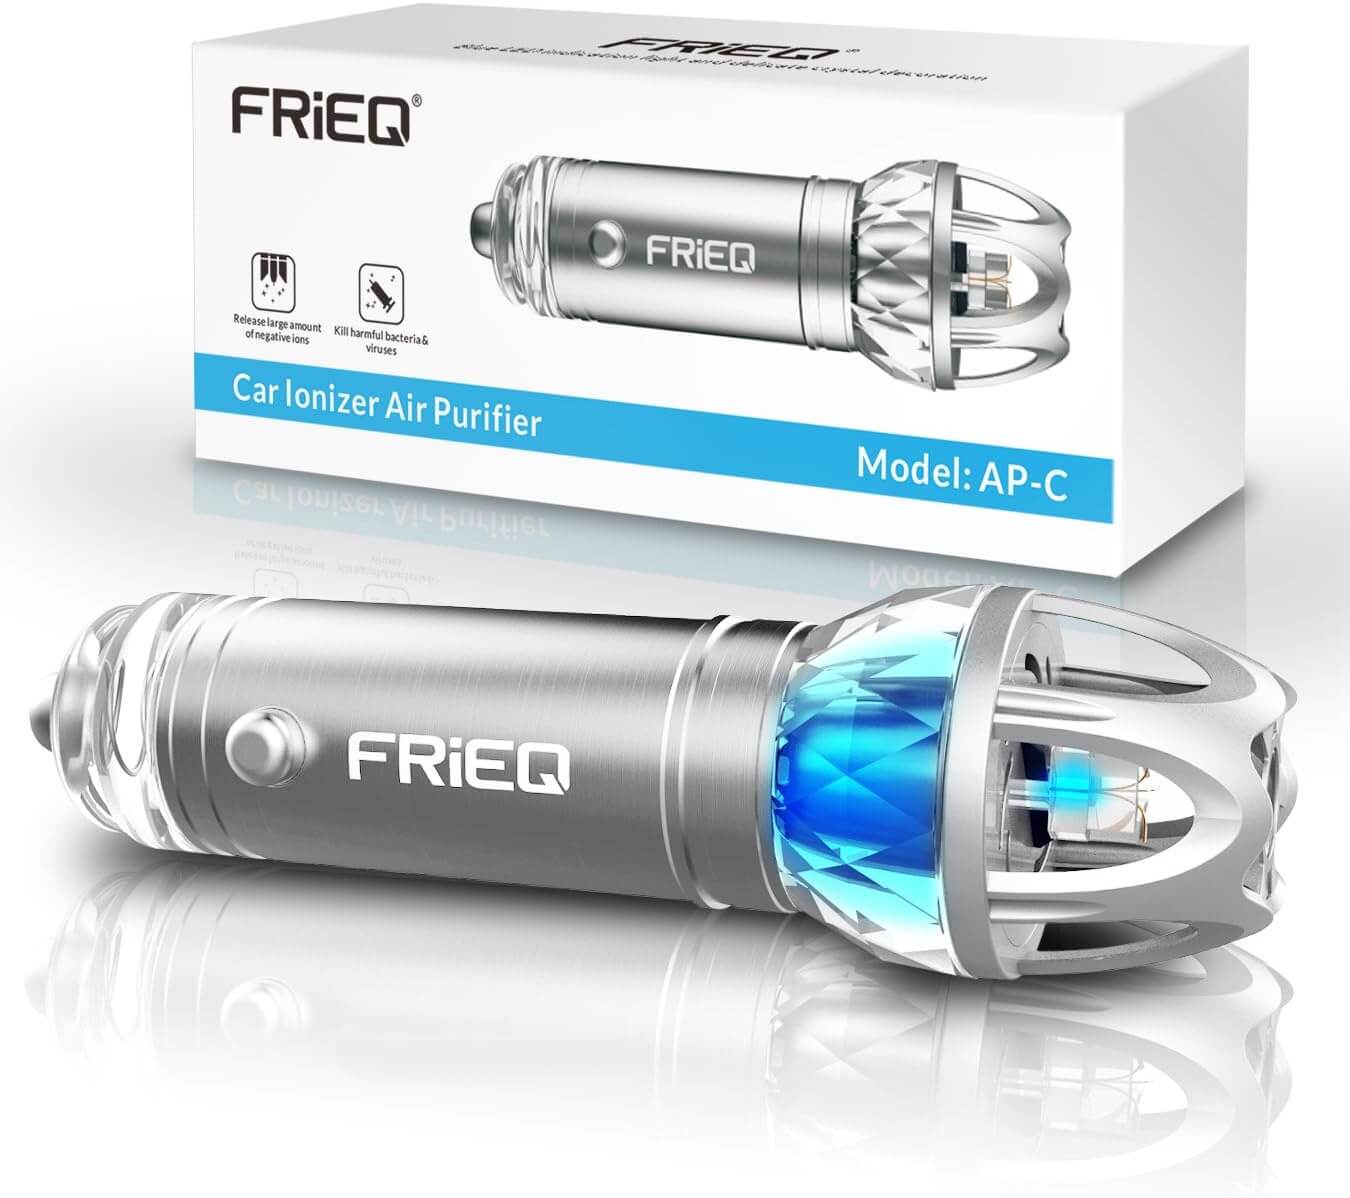 FRiEQ Car Air Purifier, Car Air Freshener and Ionic Air Purifier | Remove Dust, Pollen, Smoke and Bad Odors - Available for Your Auto or RV